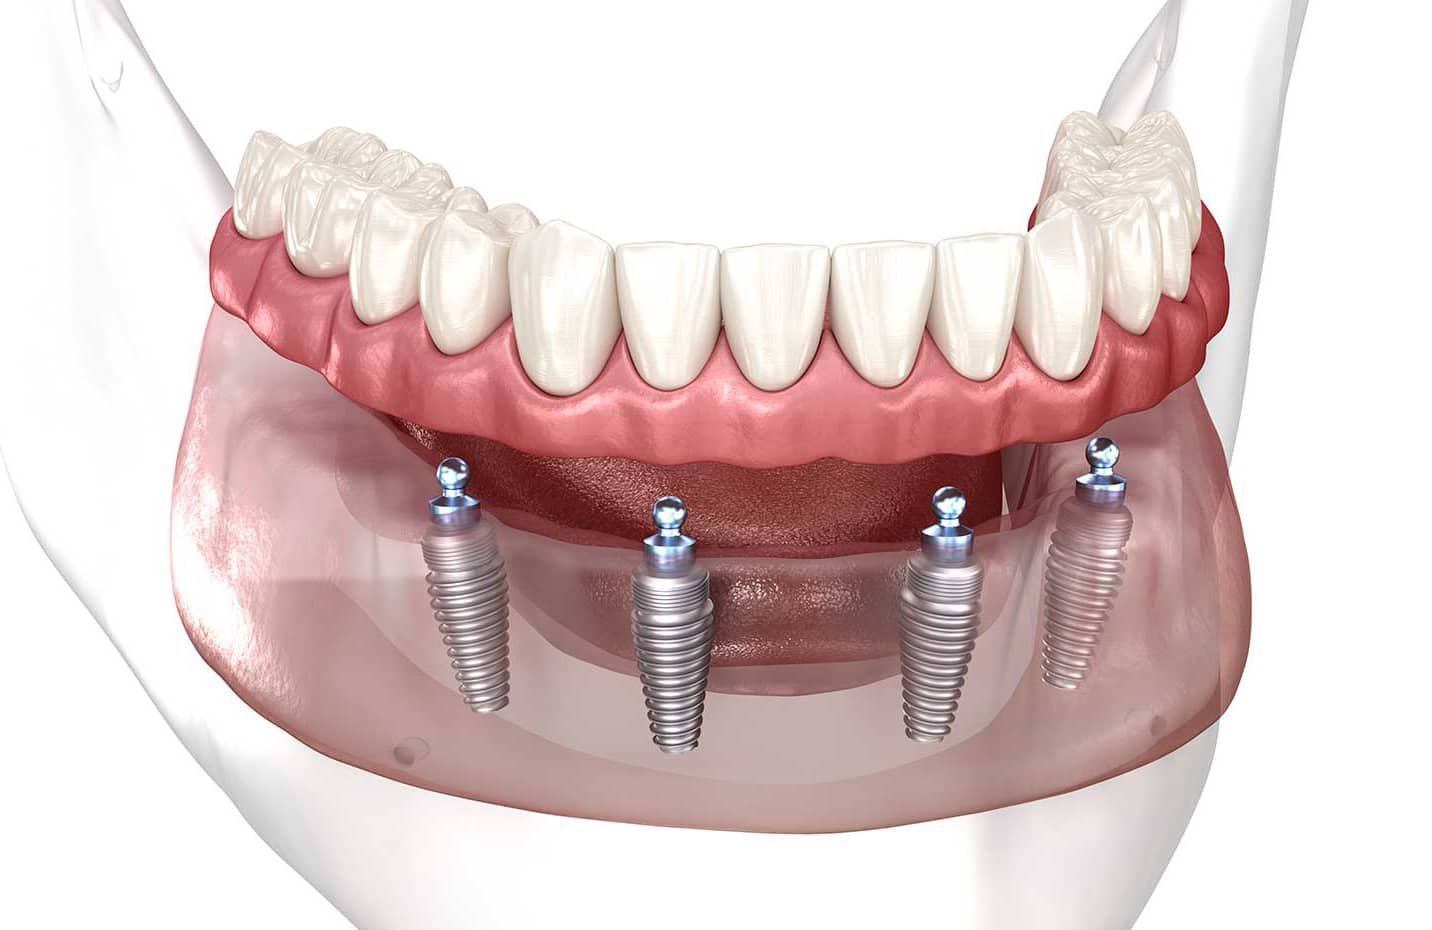 All-on-4 dentures smile with expert denture services Scarborough